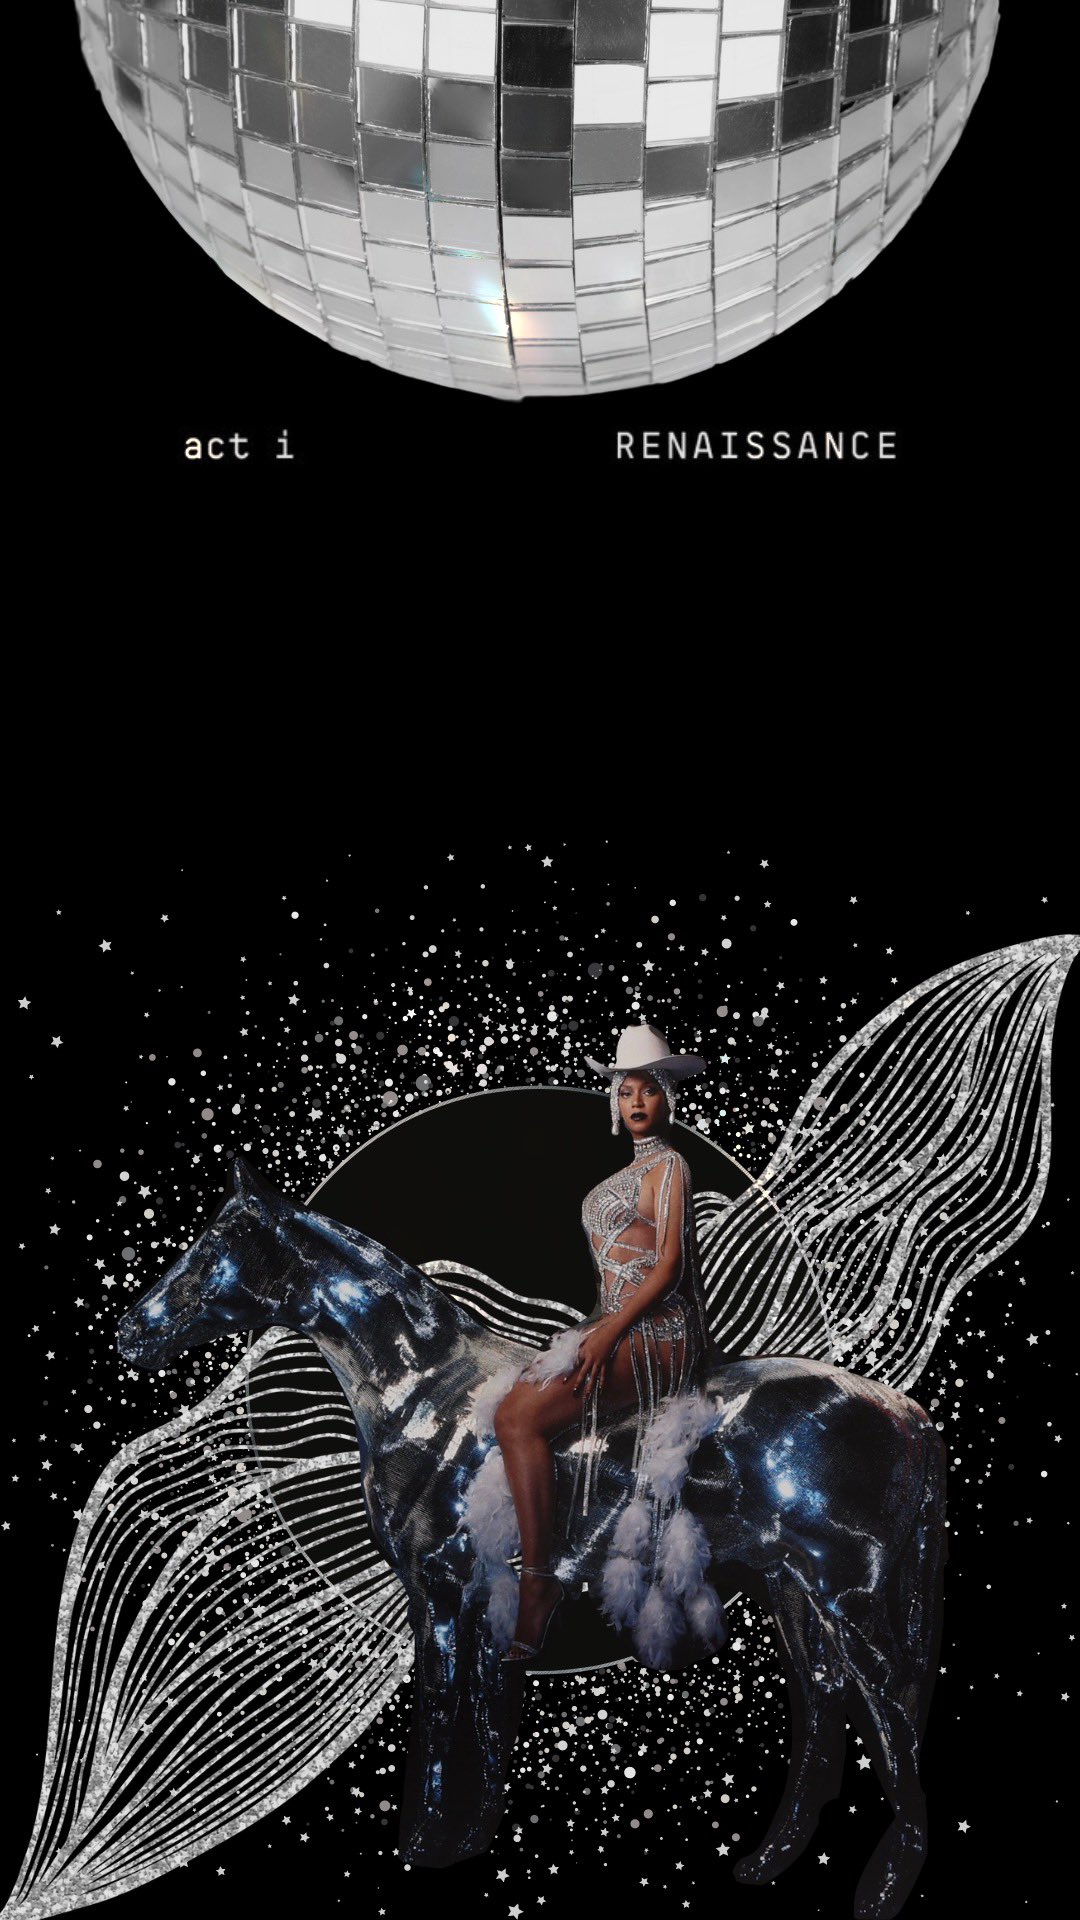 Beyoncé Giselle Knowles Carter on the cover of her new album Renaissance  Iphone Wallpaper 2022 Beyonce  Beyonce new album Rap album covers Beyoncé  wallpaper